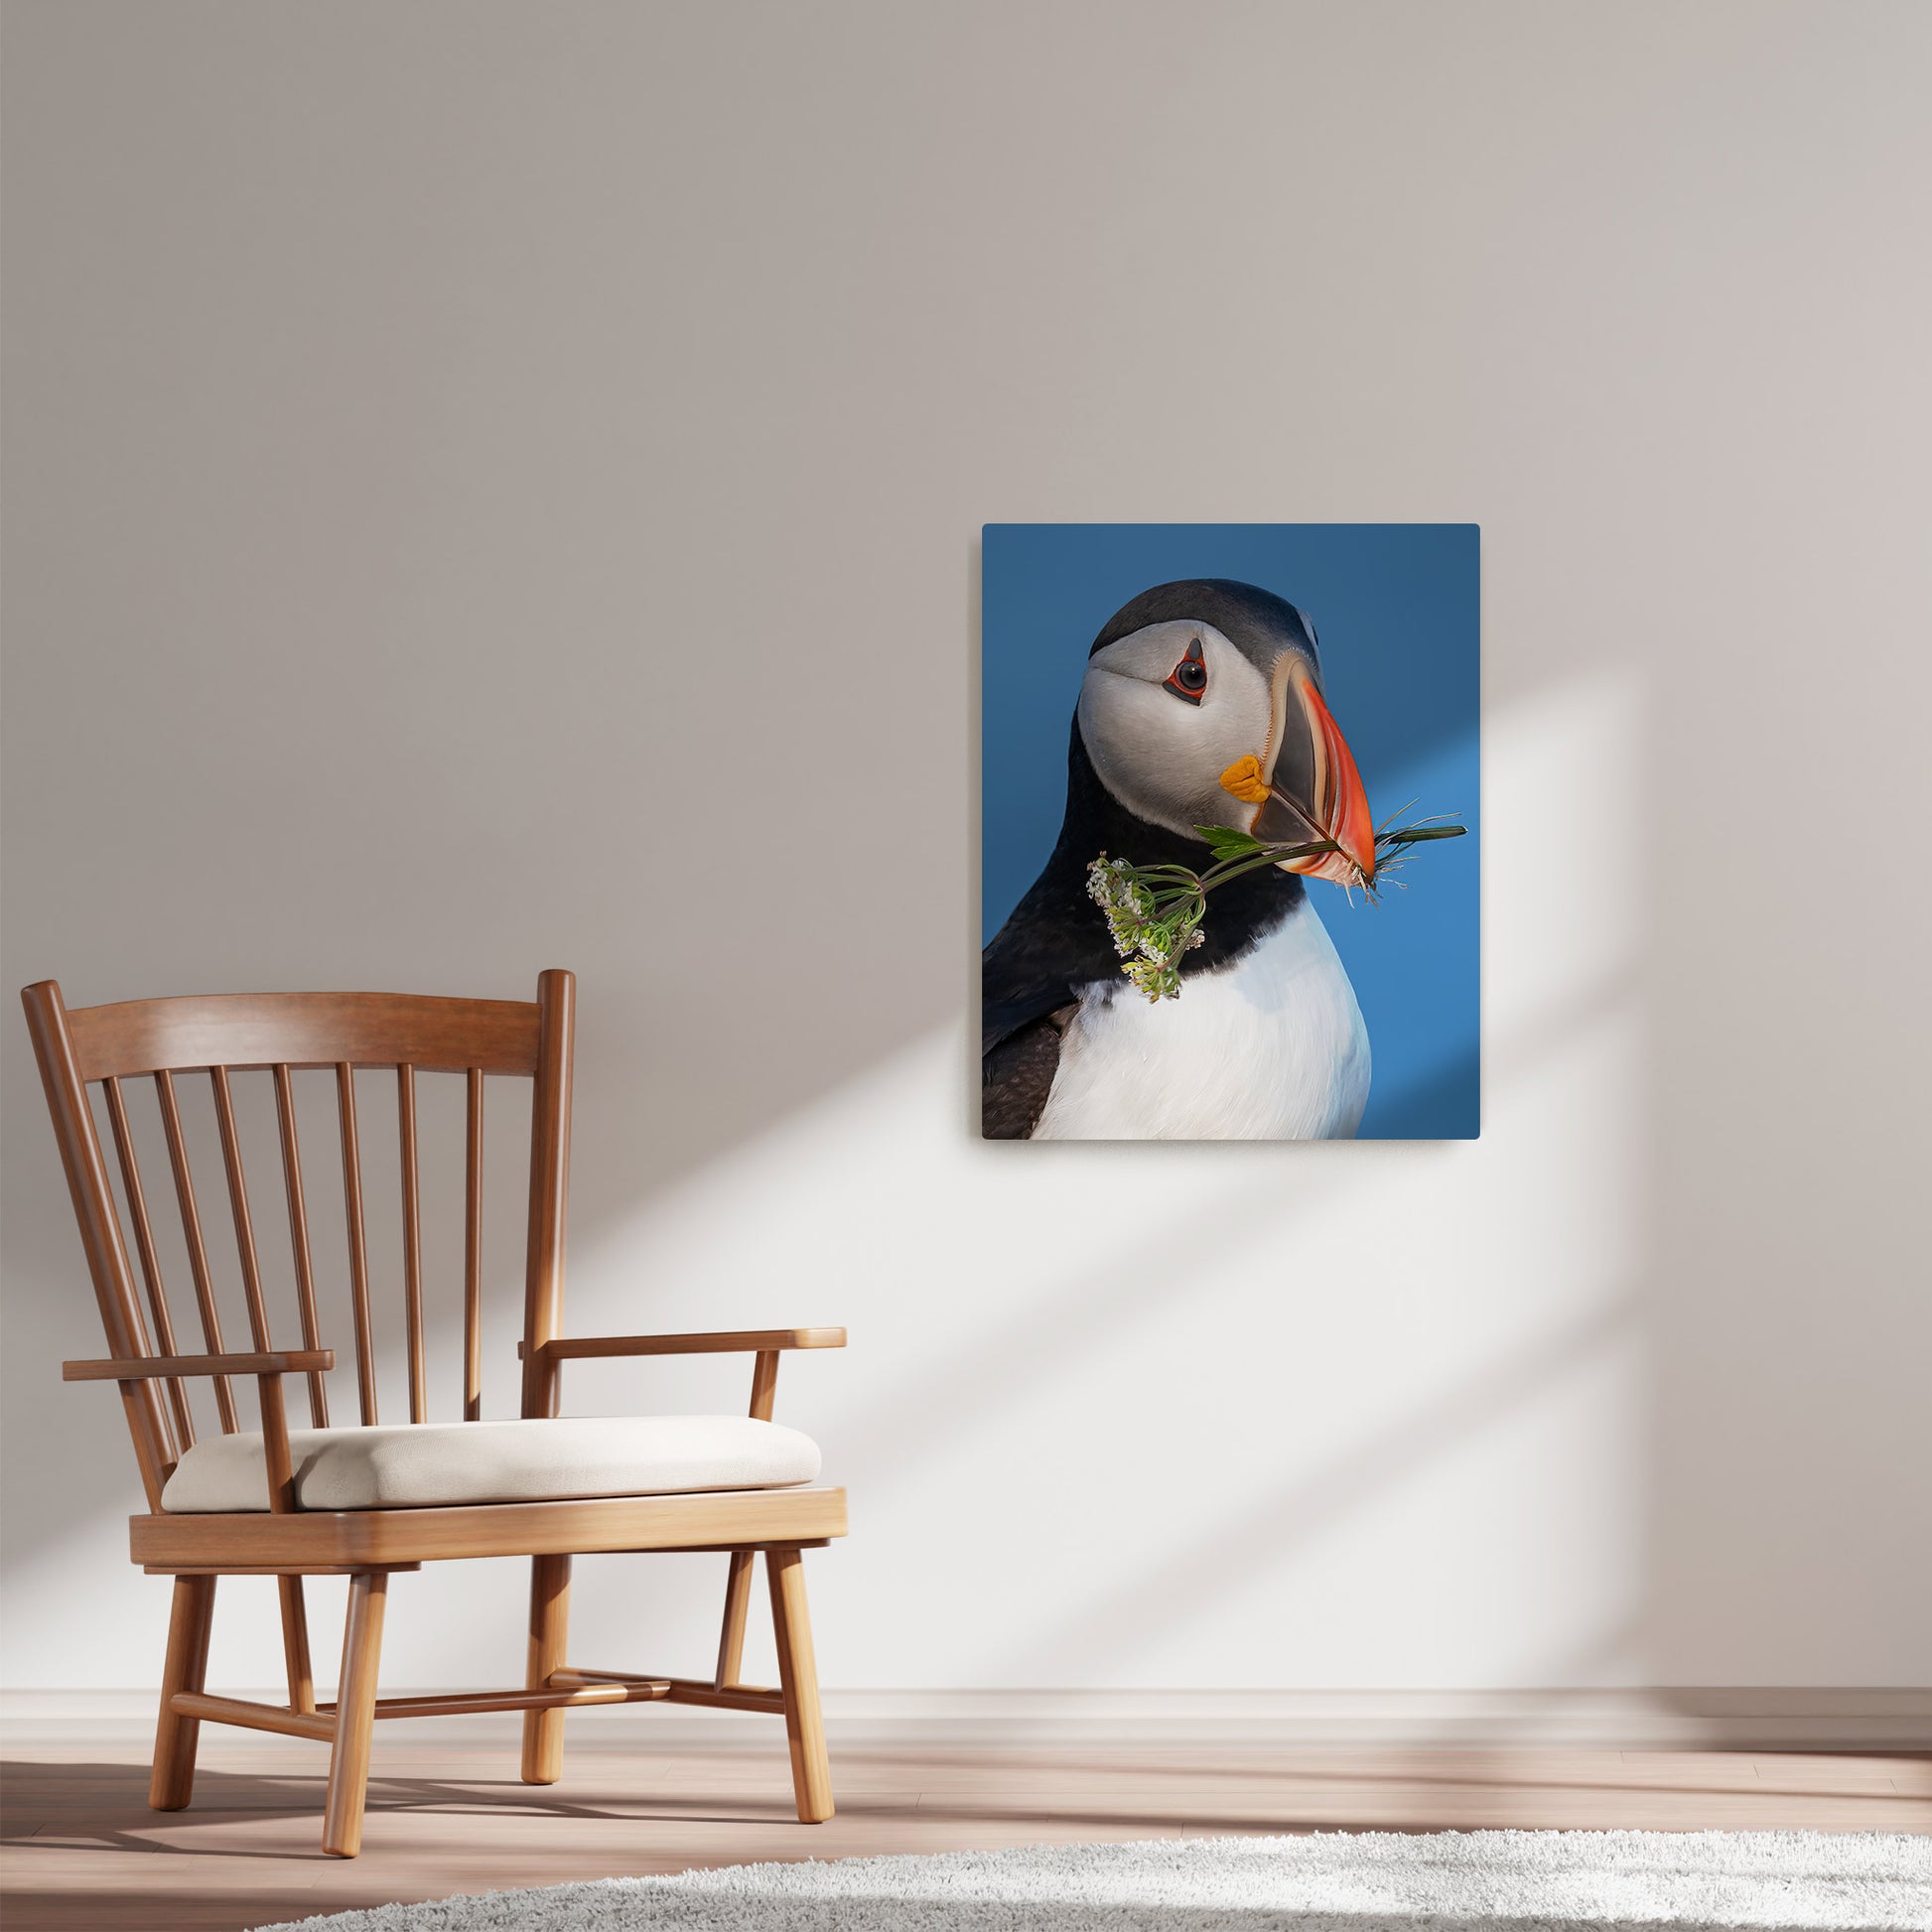 Ray Mackey's Puffin Portrait photography reproduced on HD metal print and displayed on wall